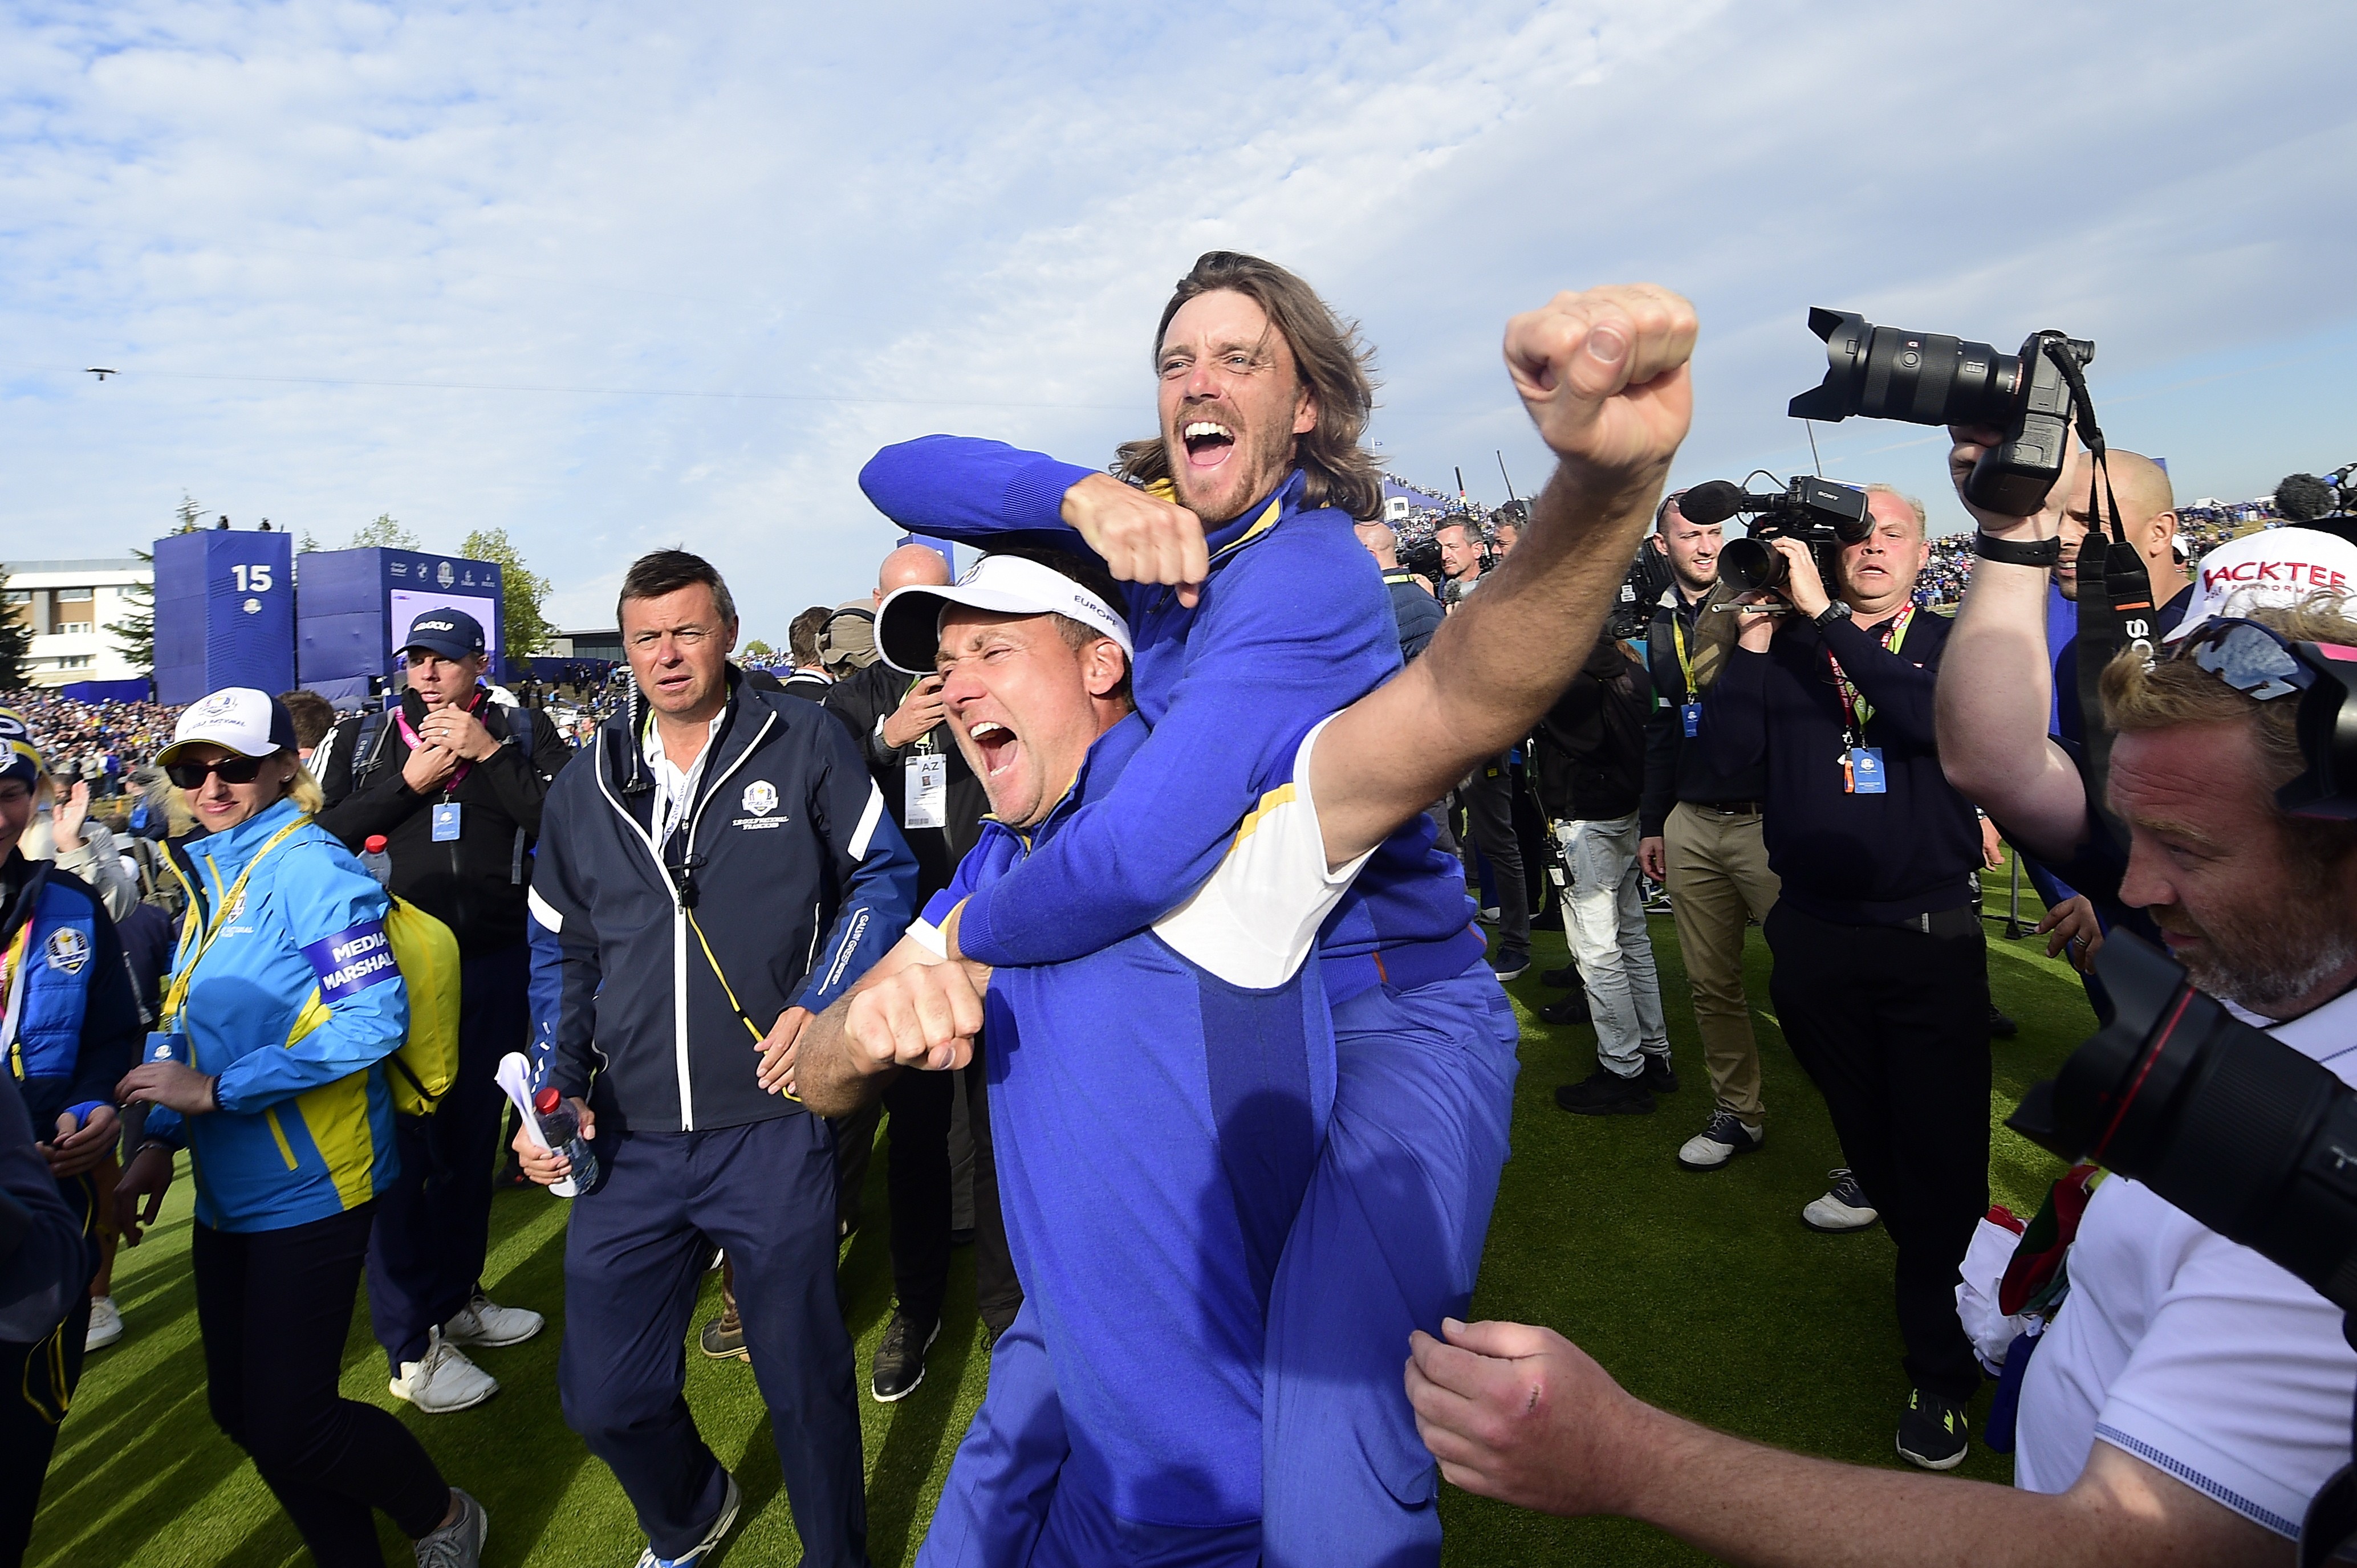 England’s Ian Poulter (left) and Tommy Fleetwood celebrate Europe winning the 2018 Ryder Cup, on the final day of the competition on September 30 at The Golf National in Guyancourt, near Paris, France. Photo: EPA-EFE